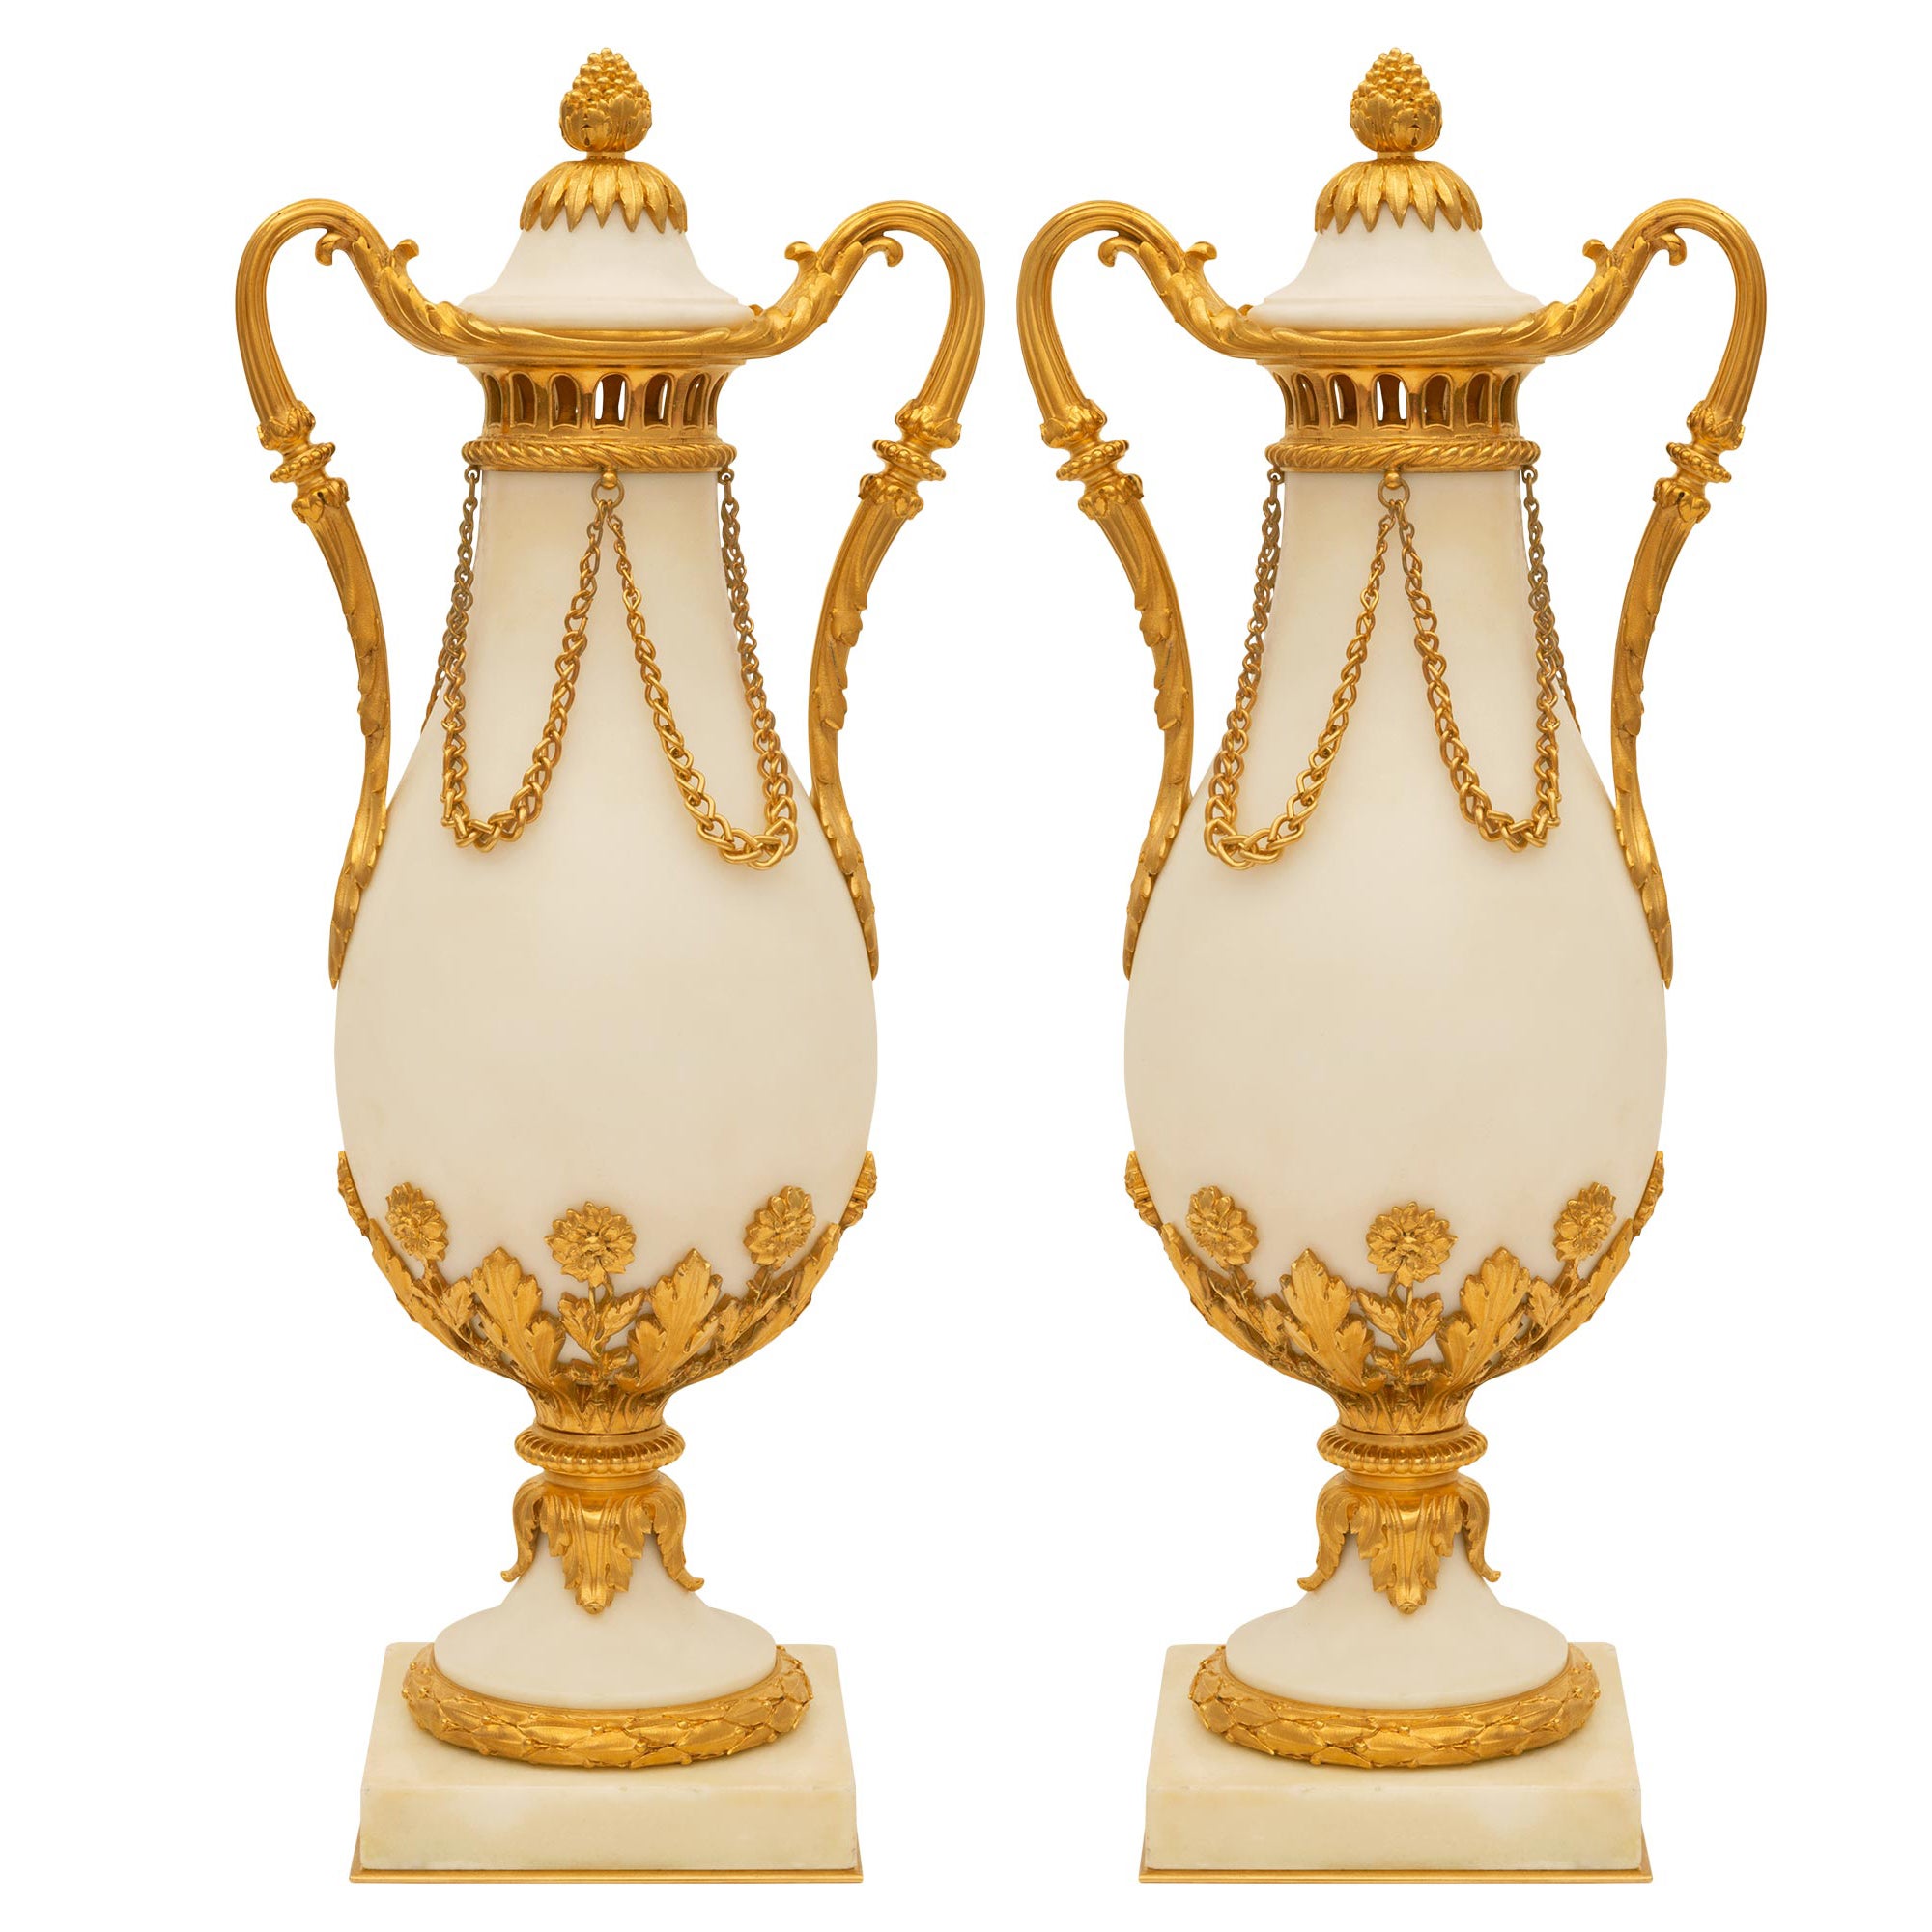 Pair of French 19th Century Louis XVI St. Marble and Ormolu Lidded Urns